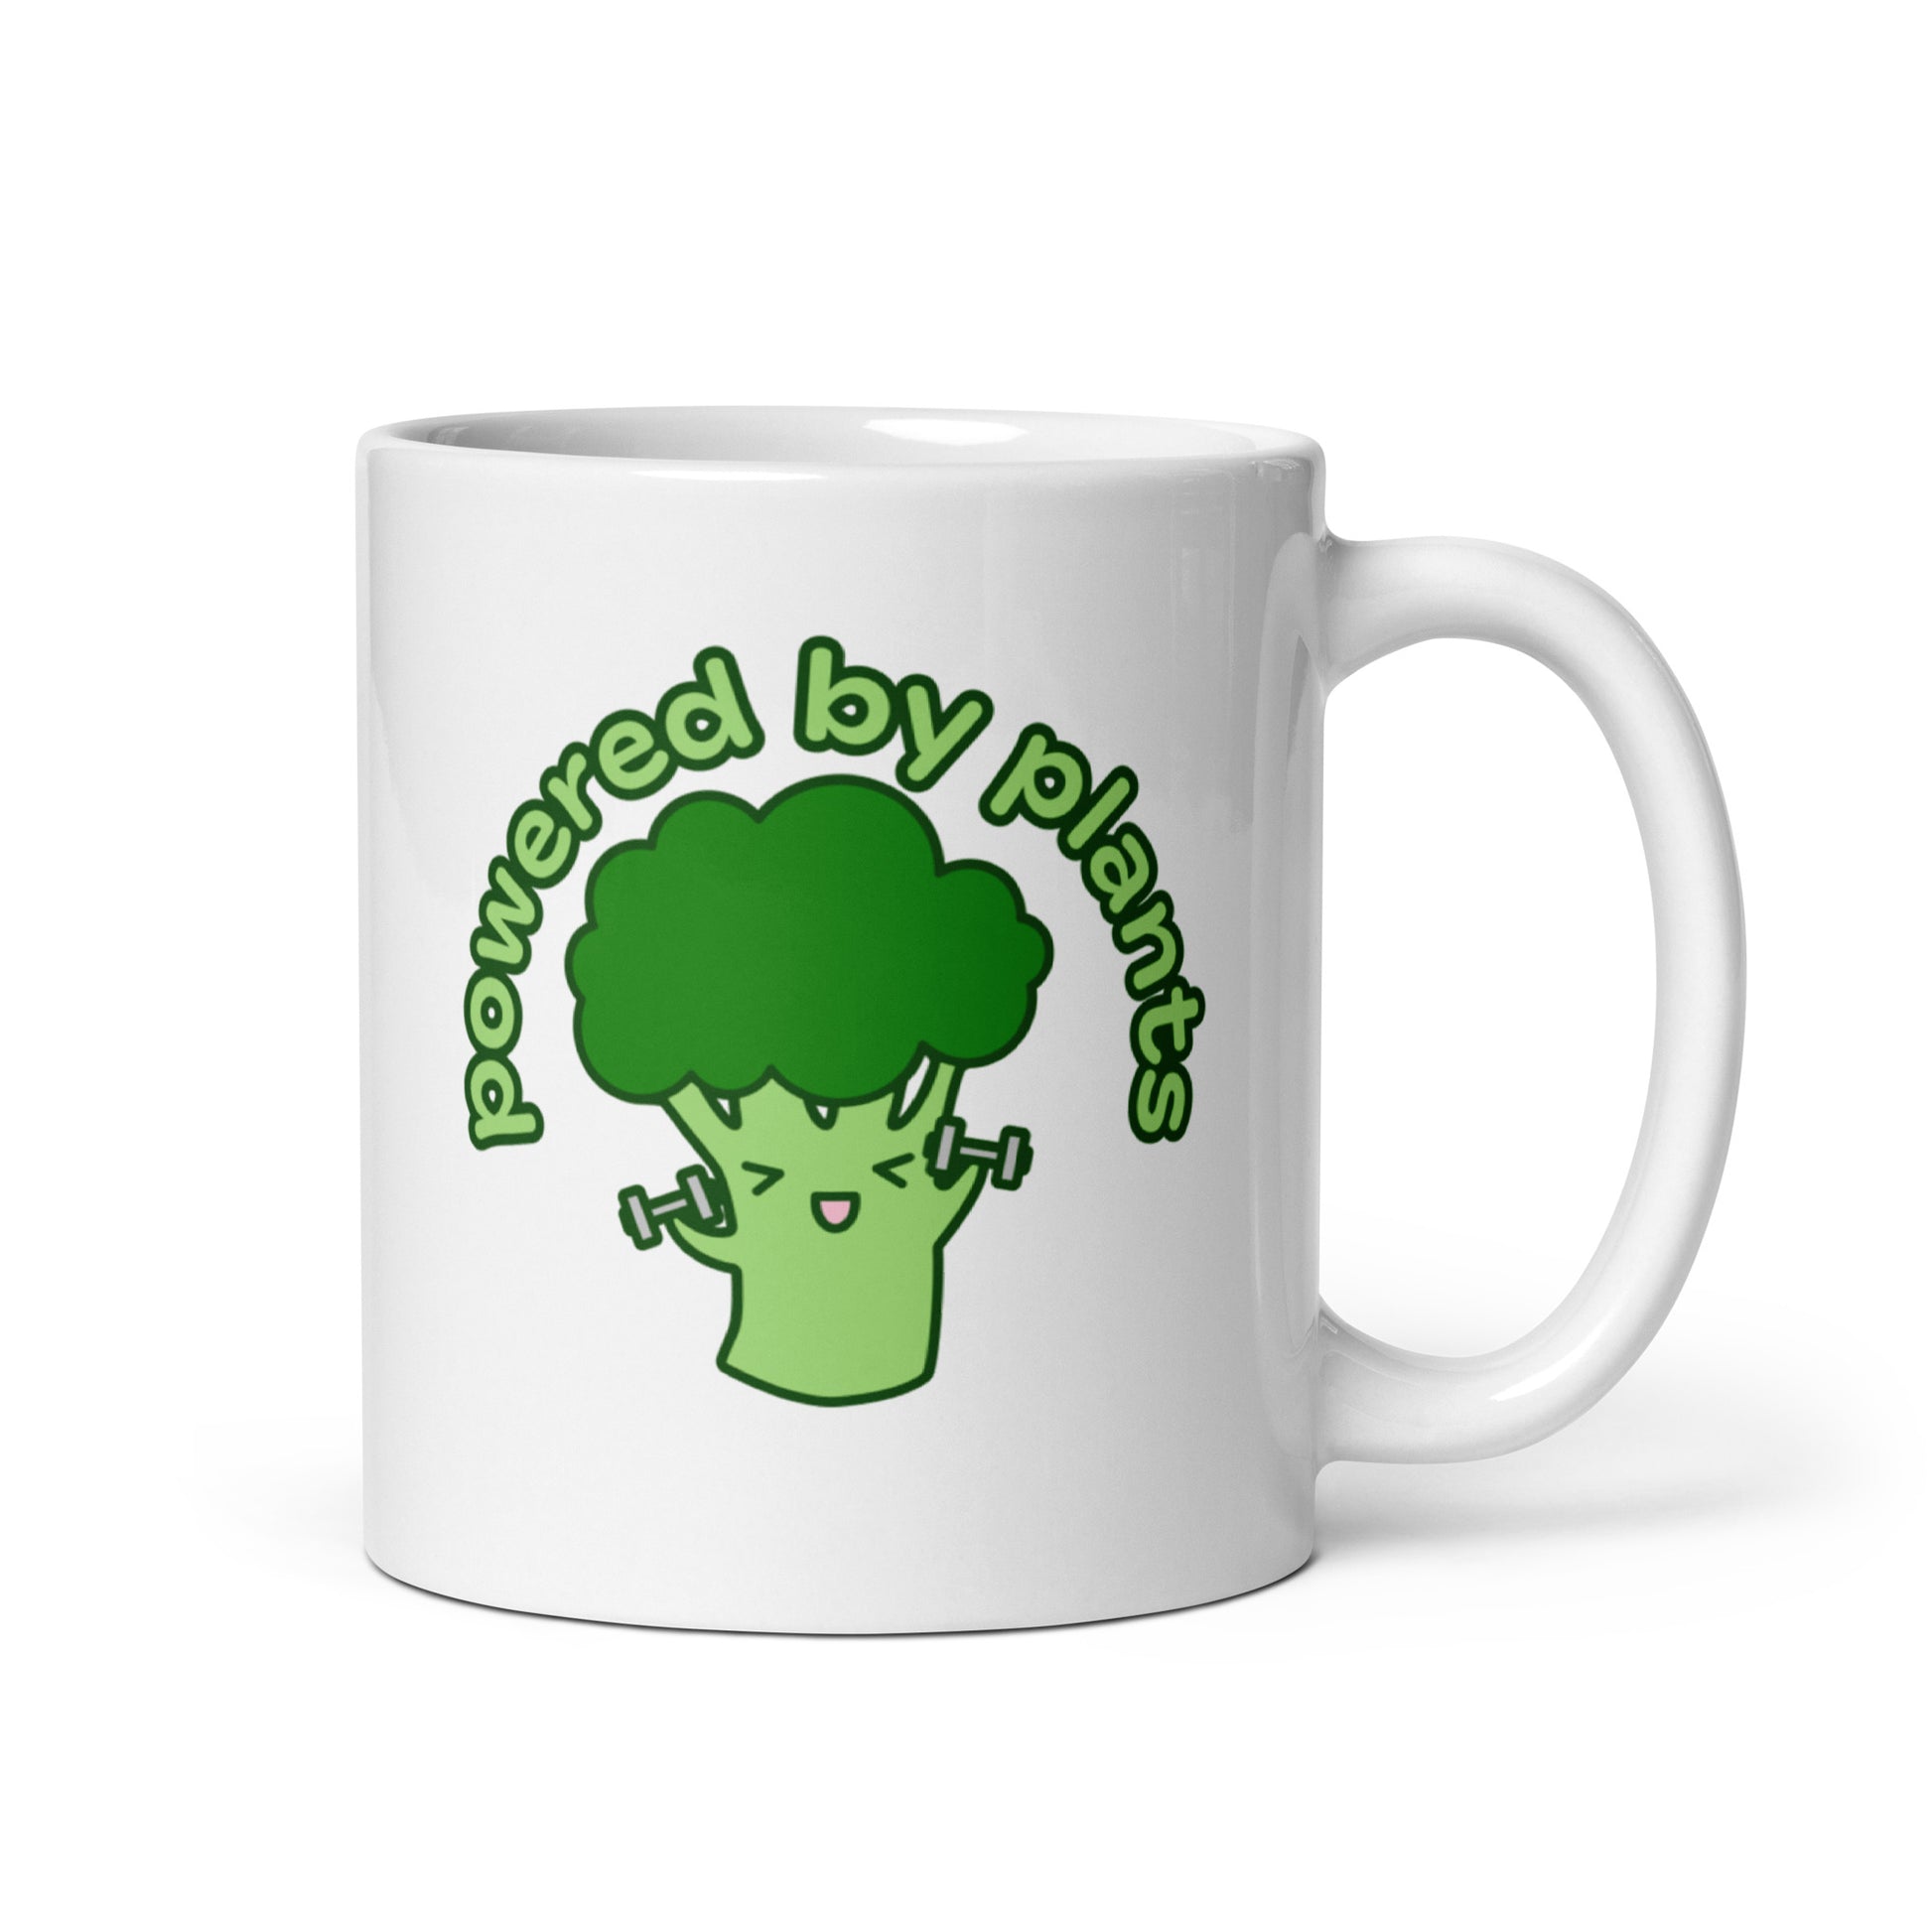 A white 11 ounce ceramic coffee mug featuring a cute illustration of a cartoon broccoli. The broccoli is excitedly lifting weights and text above him in an arc reads "powered by plants".